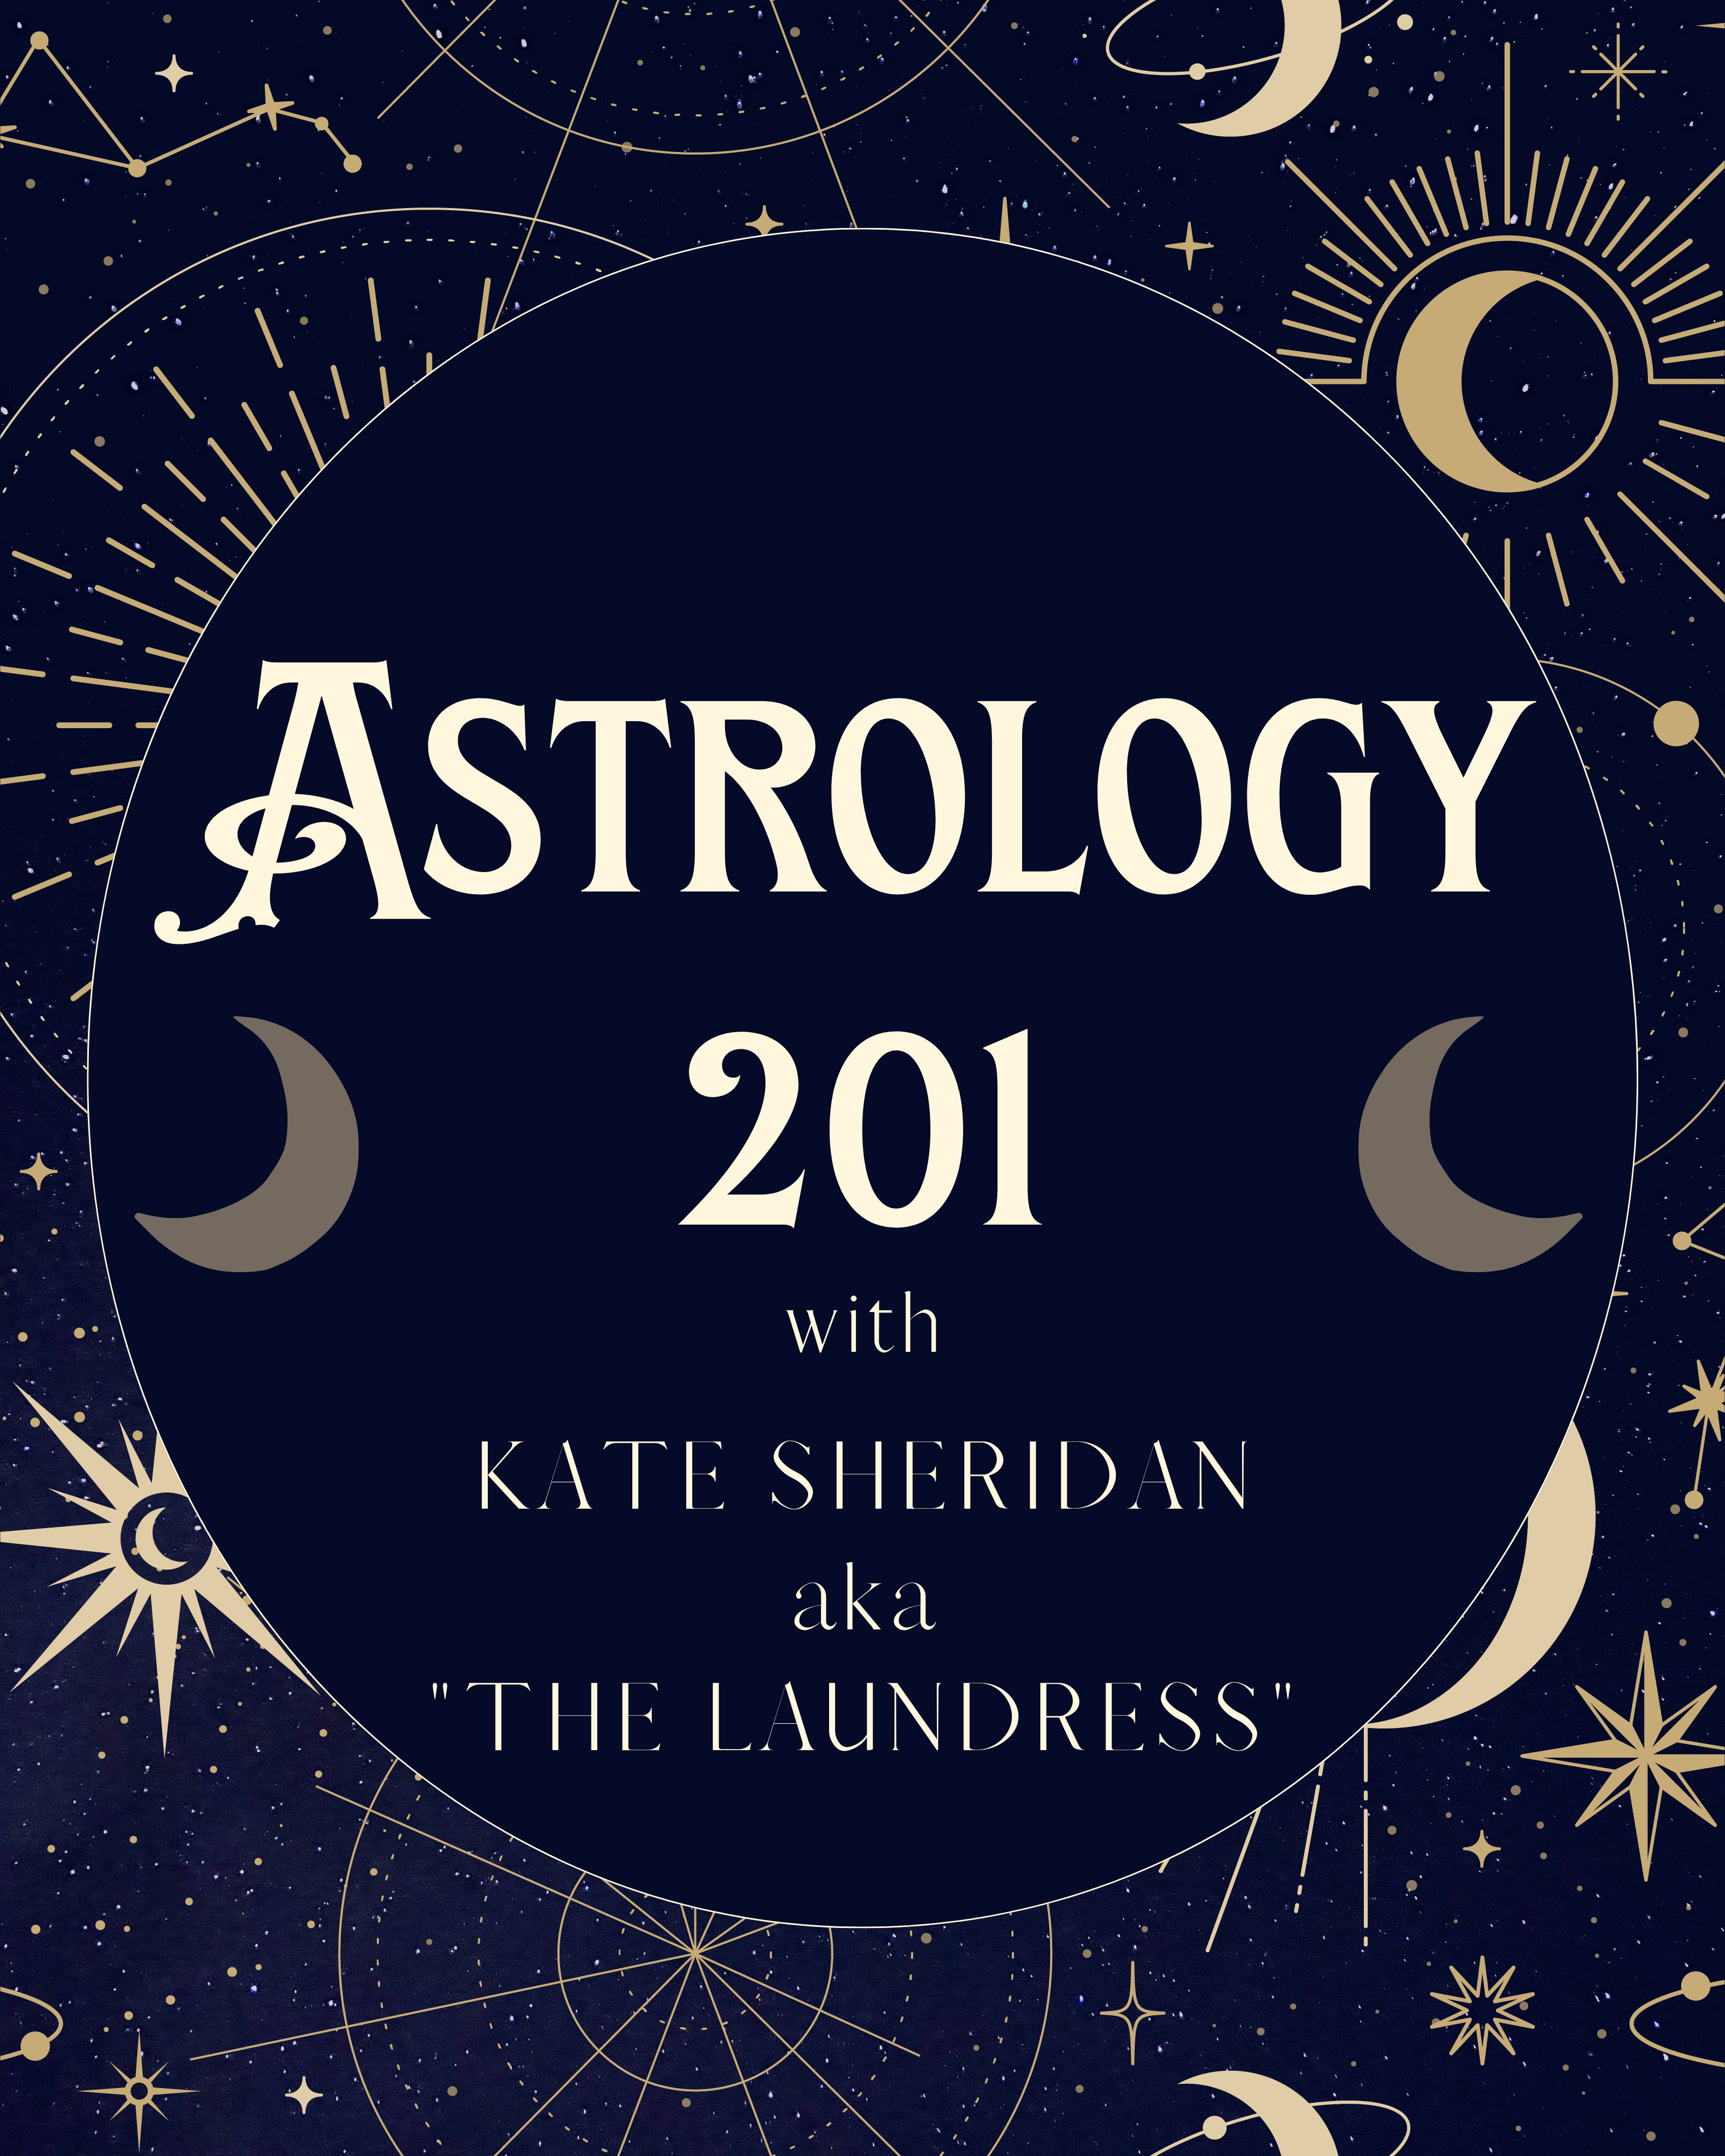 Astrology 201 with Kate Sheridan AKA the Laundress with stars and moons